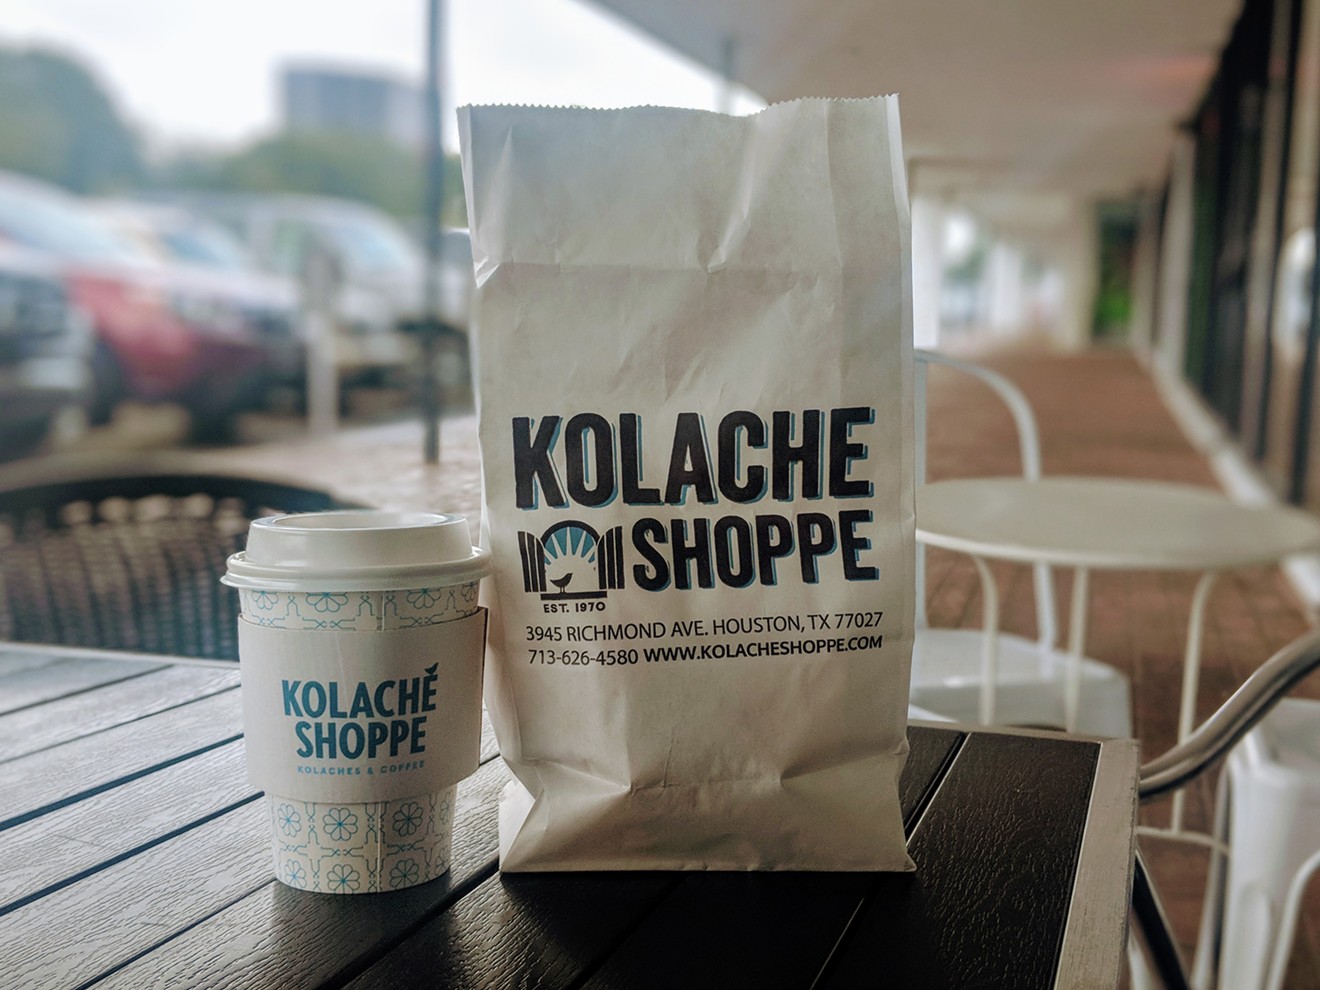 Kolache Shoppe is a Houston institution selling the best kolaches in town, including the star of this week's column, the brisket kolache